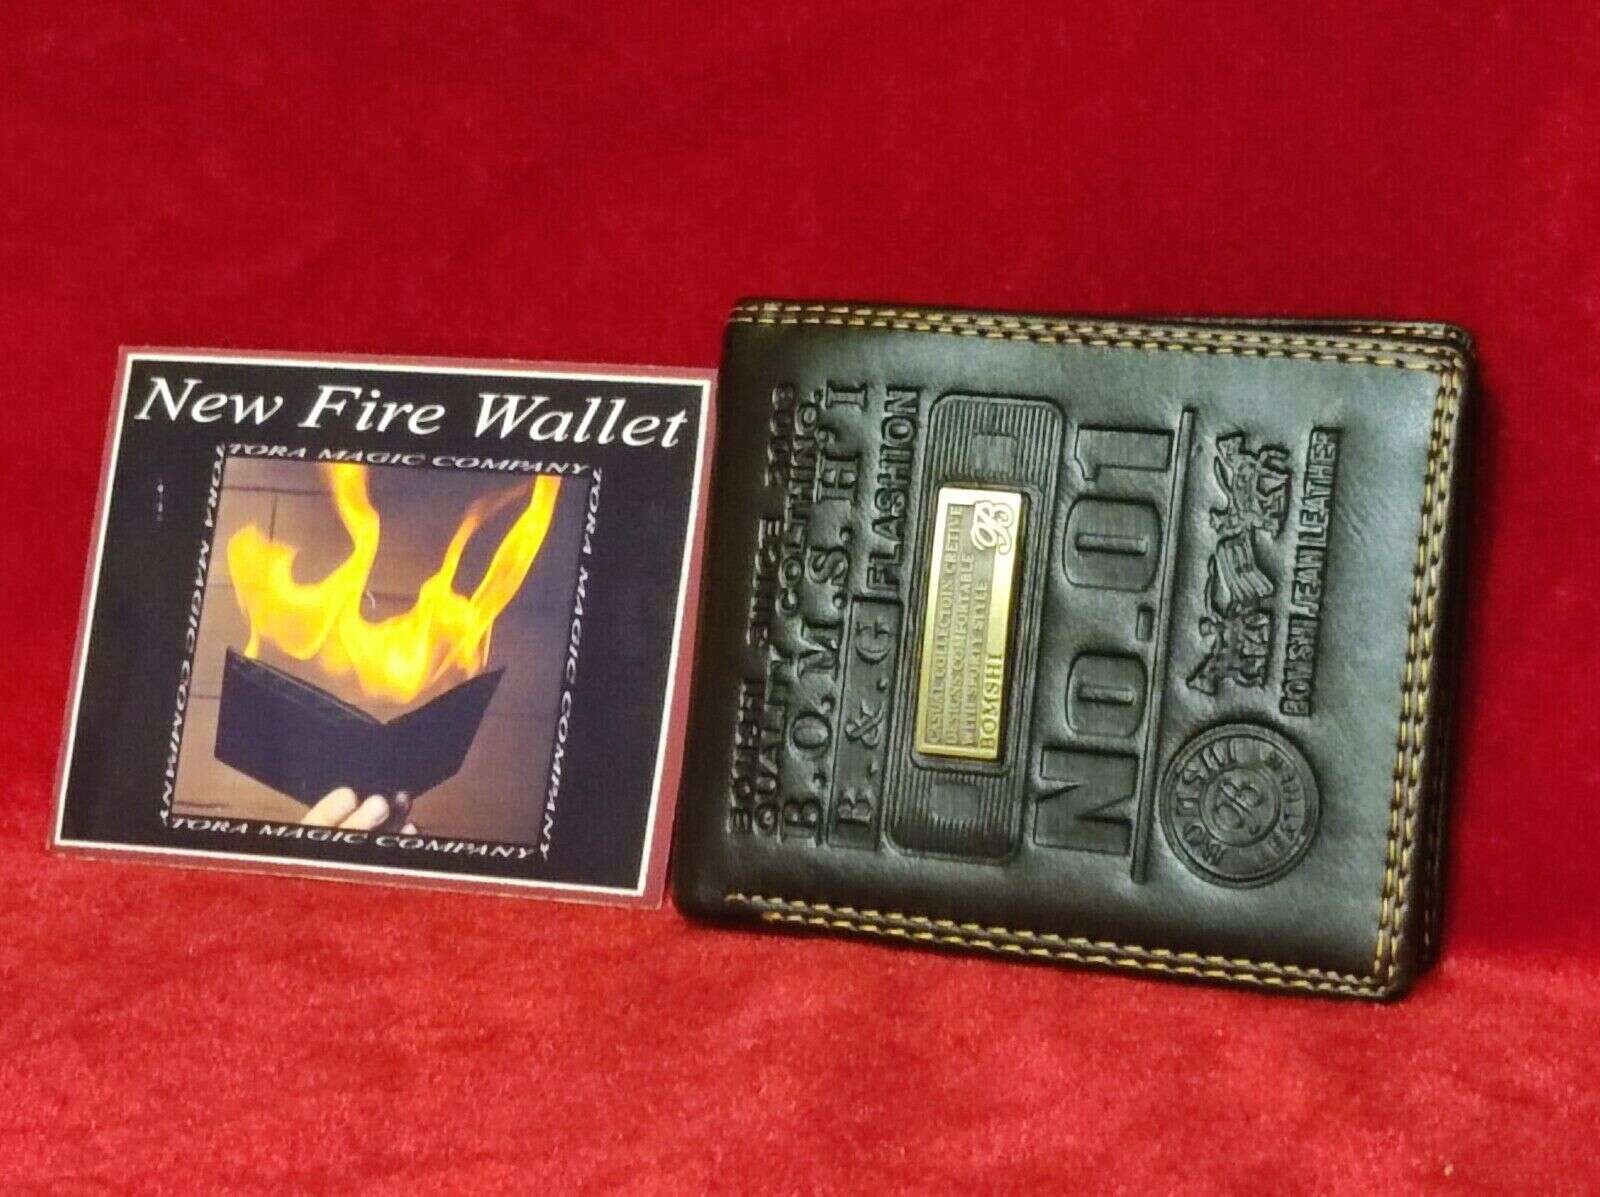 New Fire Wallet by Tora Magic on red background shown closed next to photograph of wallet in action